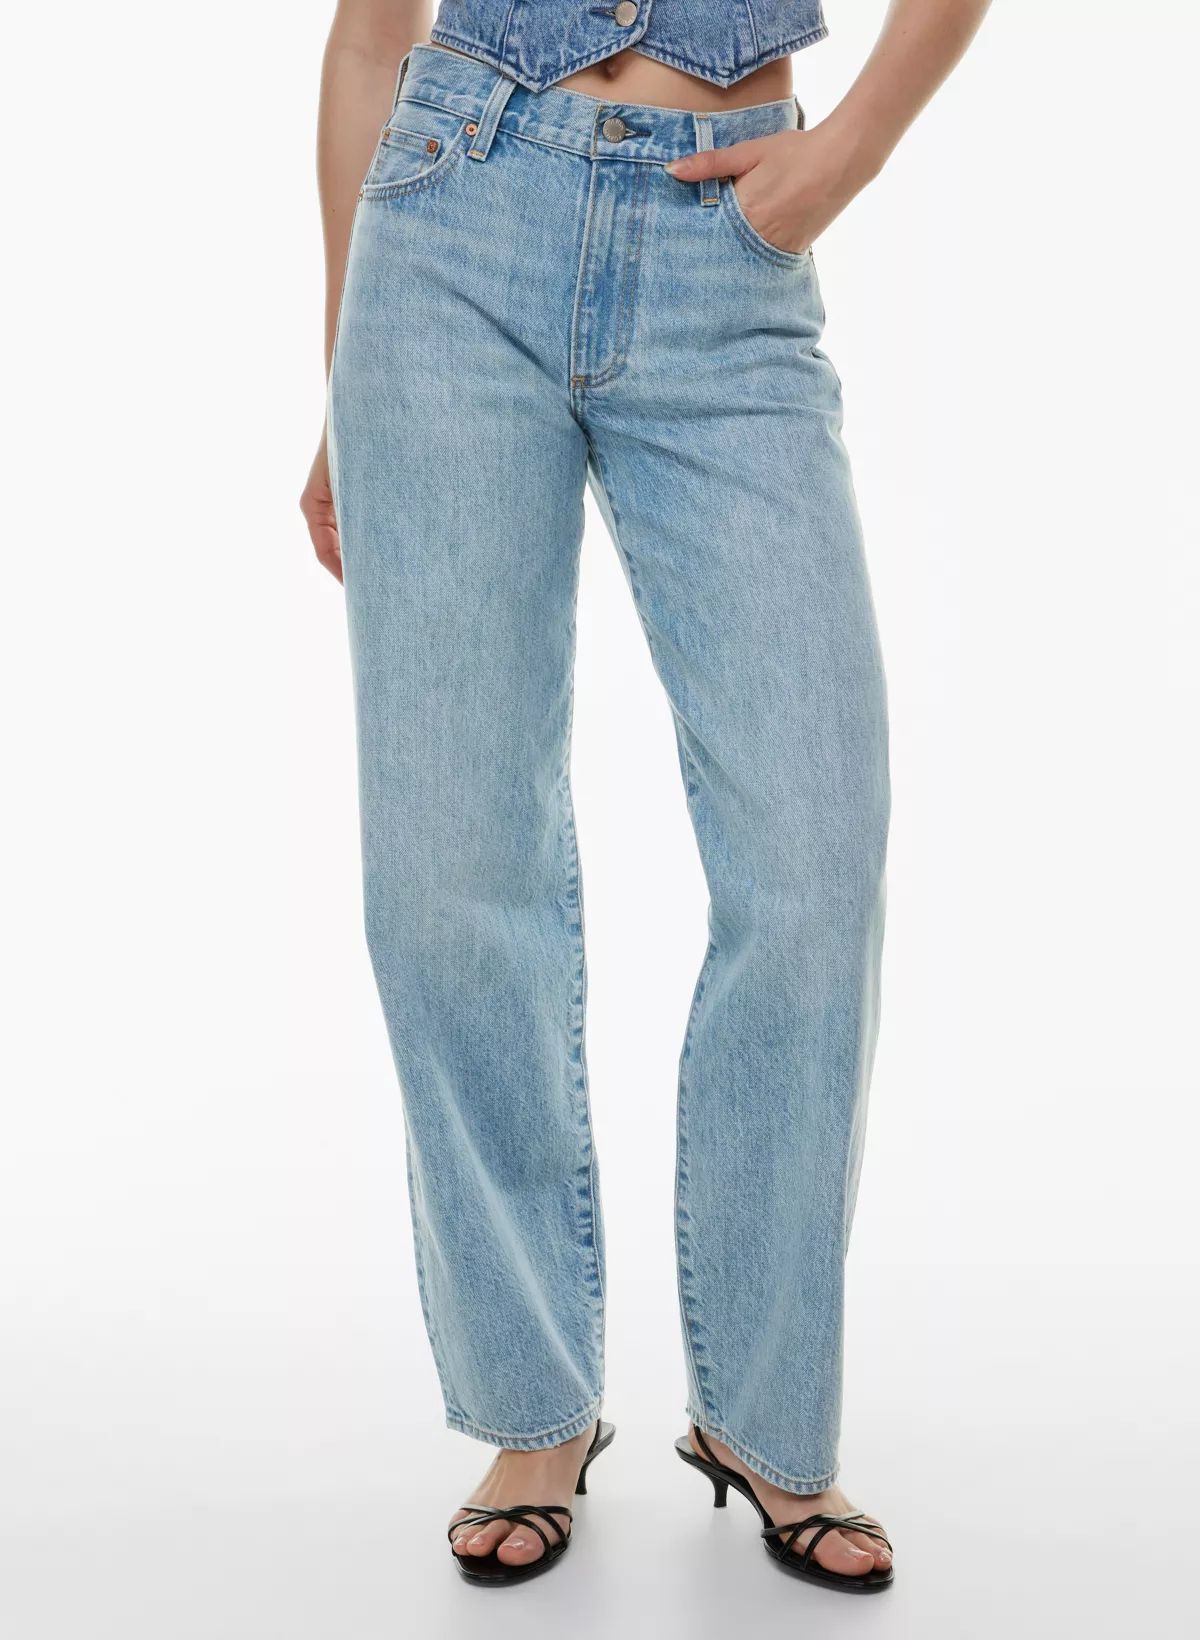 THE ‘90S KATE MID-RISE BAGGY JEAN | Aritzia